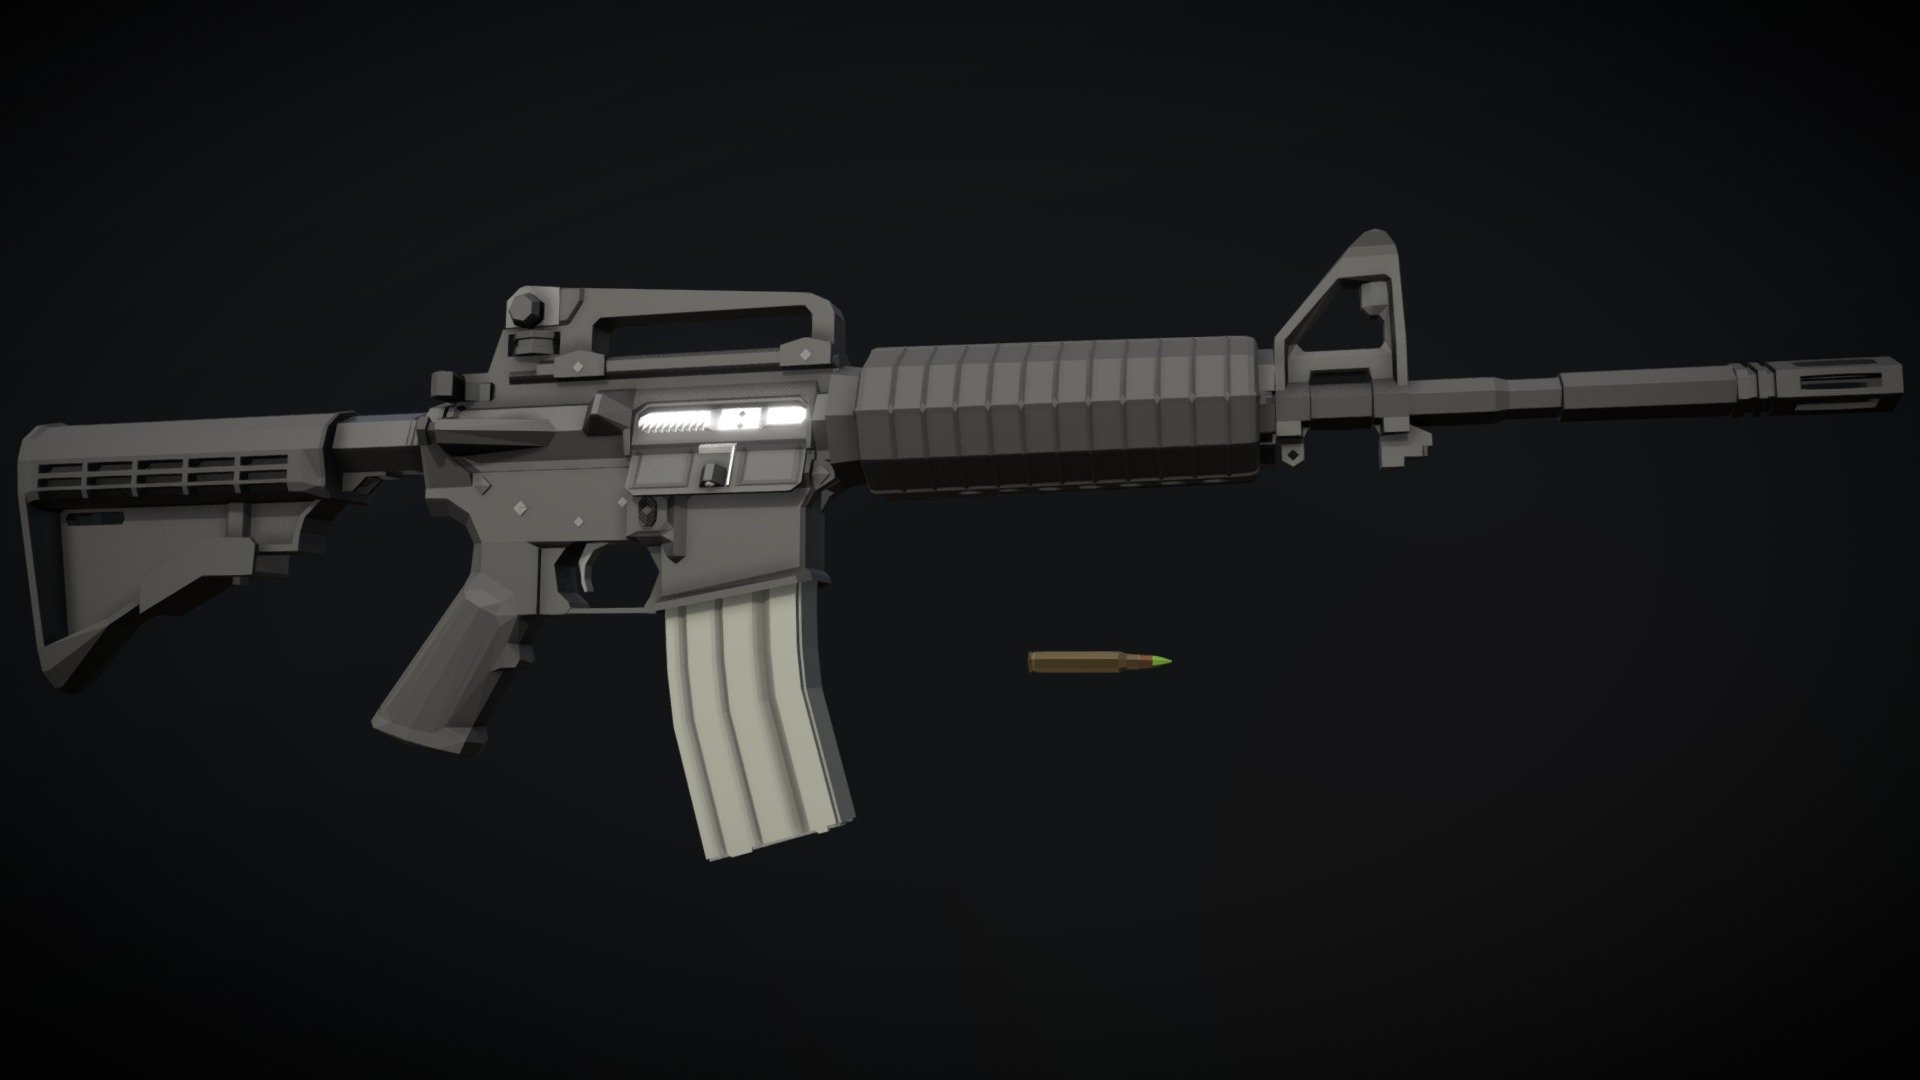 low-poly model of the M4A1 Carbine. I've uploaded one before, but it was based on an AR-15 model I made over a year ago, and this one is remade entirely from scratch, with better geometry and much more accurate dimensions and features.

30/01/23:
simplified some geometry, reduced tri count by about 1k, fixed a few things (lowered front sight post from &ldquo;F